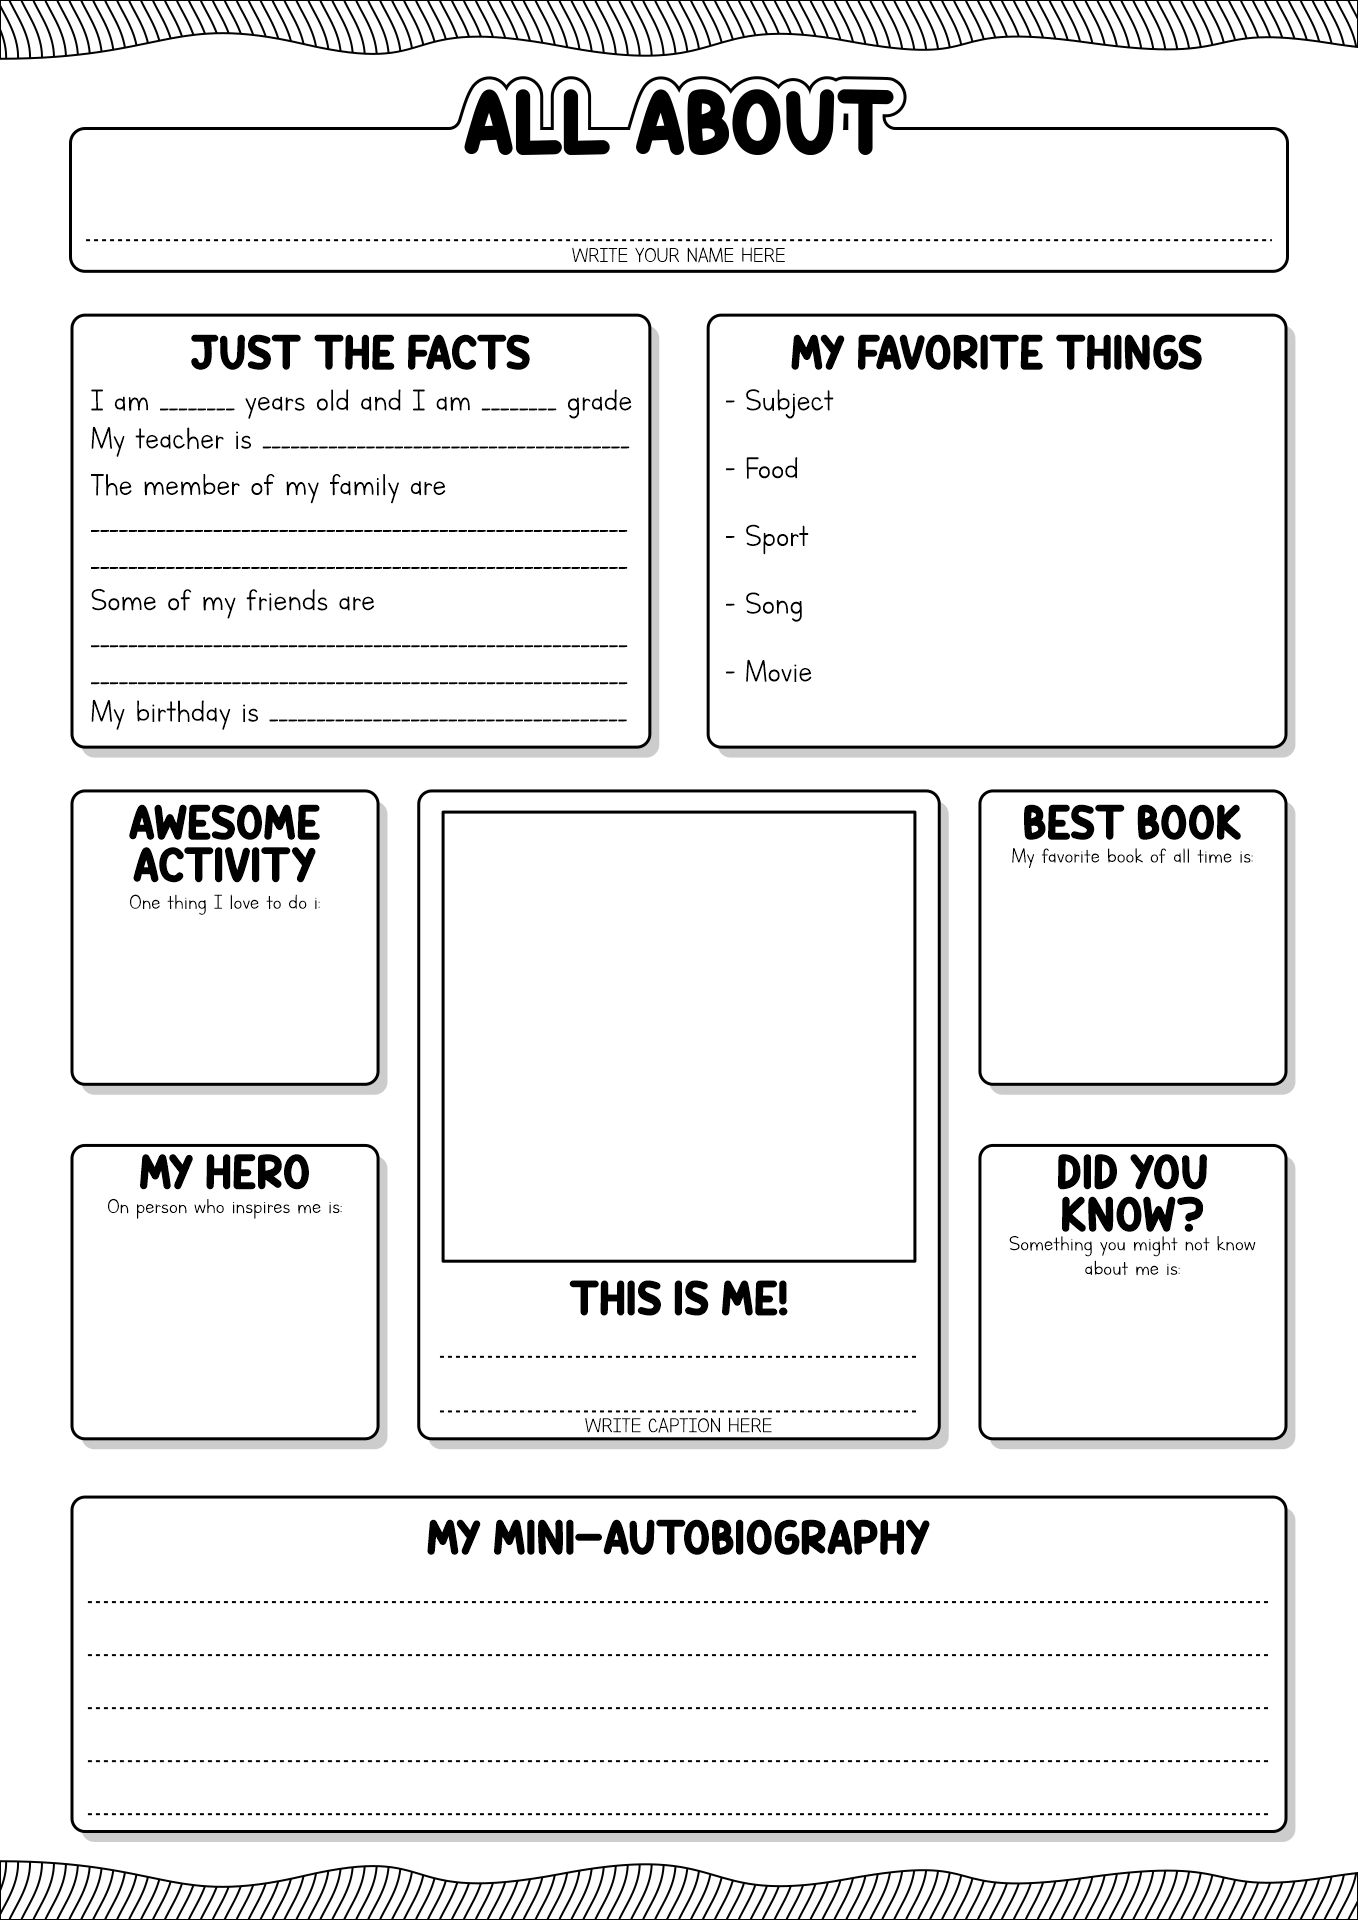 8-best-images-of-classroom-getting-to-know-you-printables-get-to-know